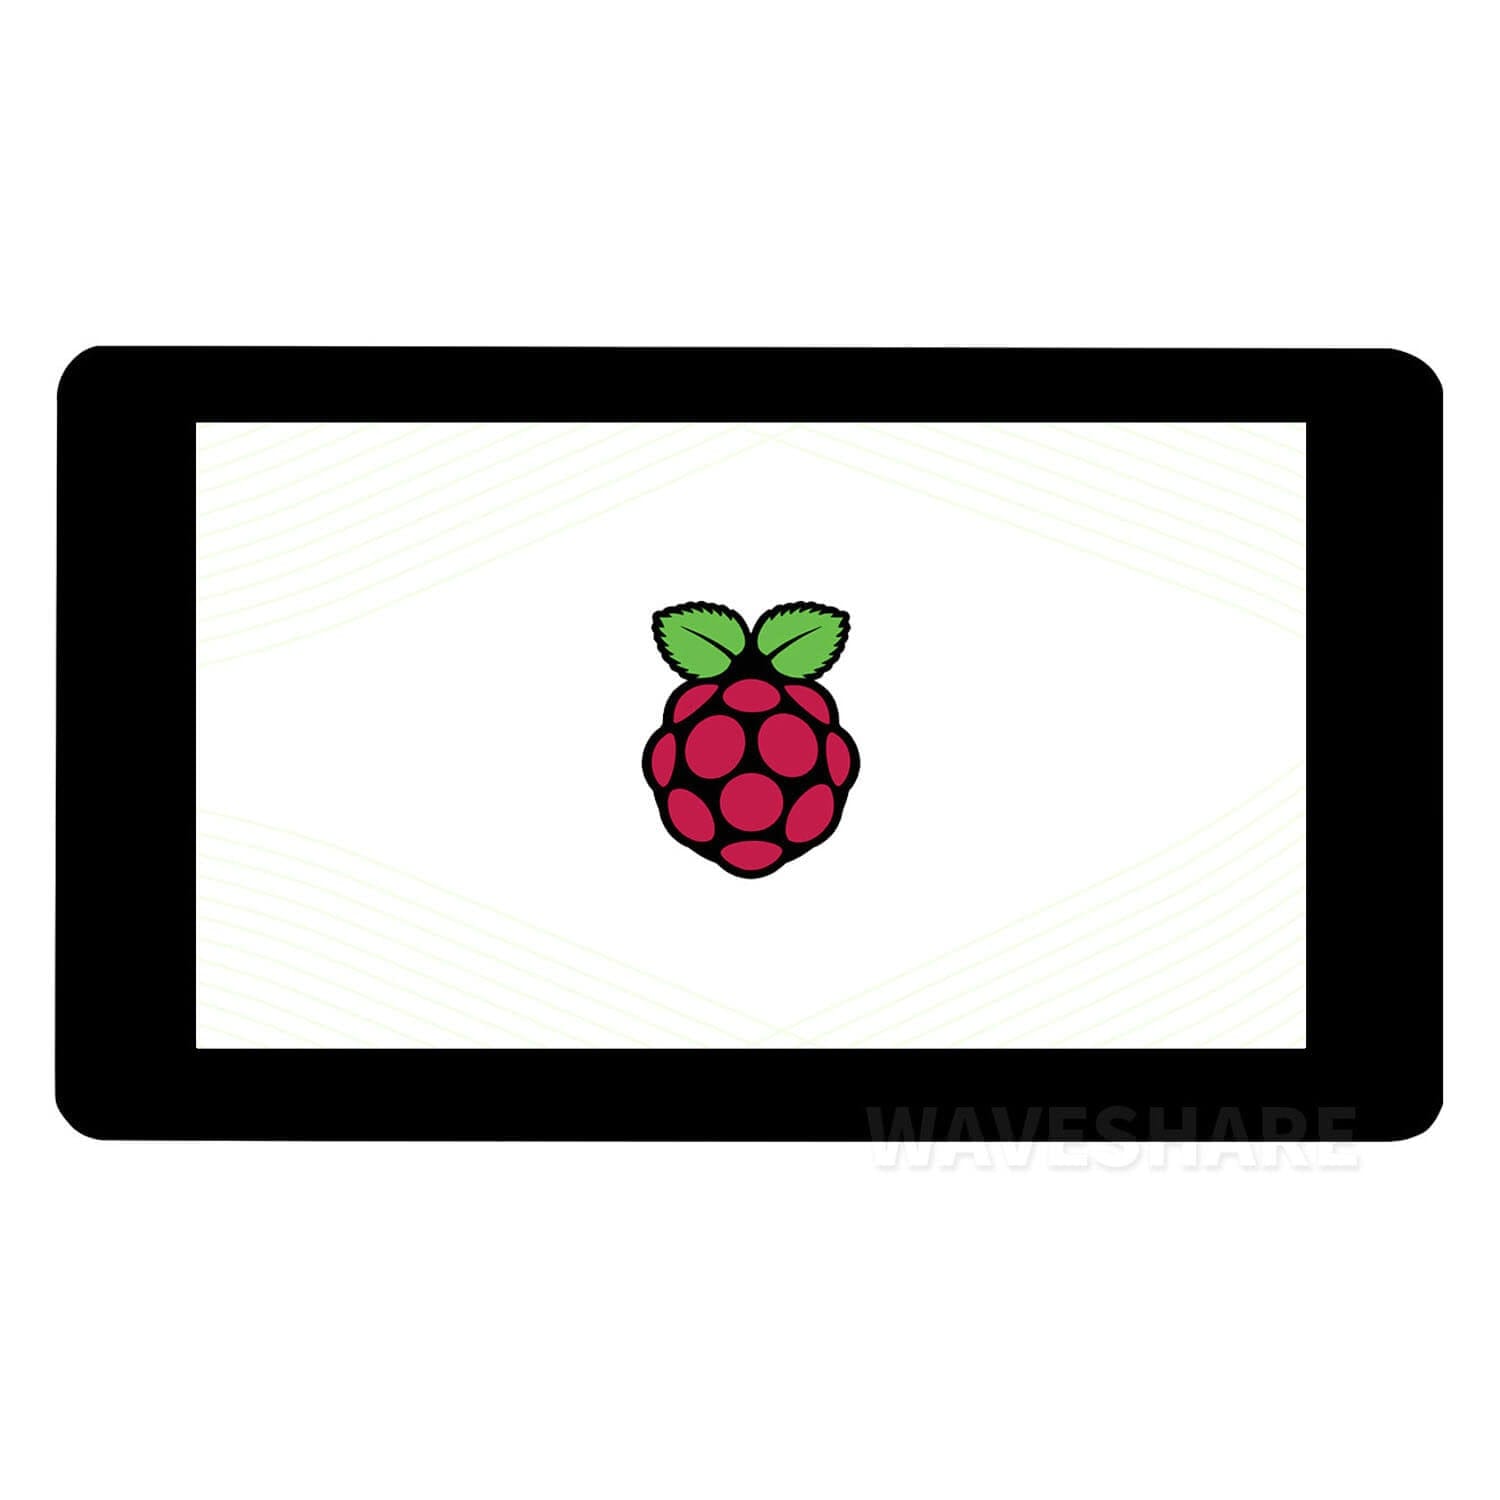 7" DSI Capacitive Touch IPS Display for Raspberry Pi (1024×600) - The Pi Hut